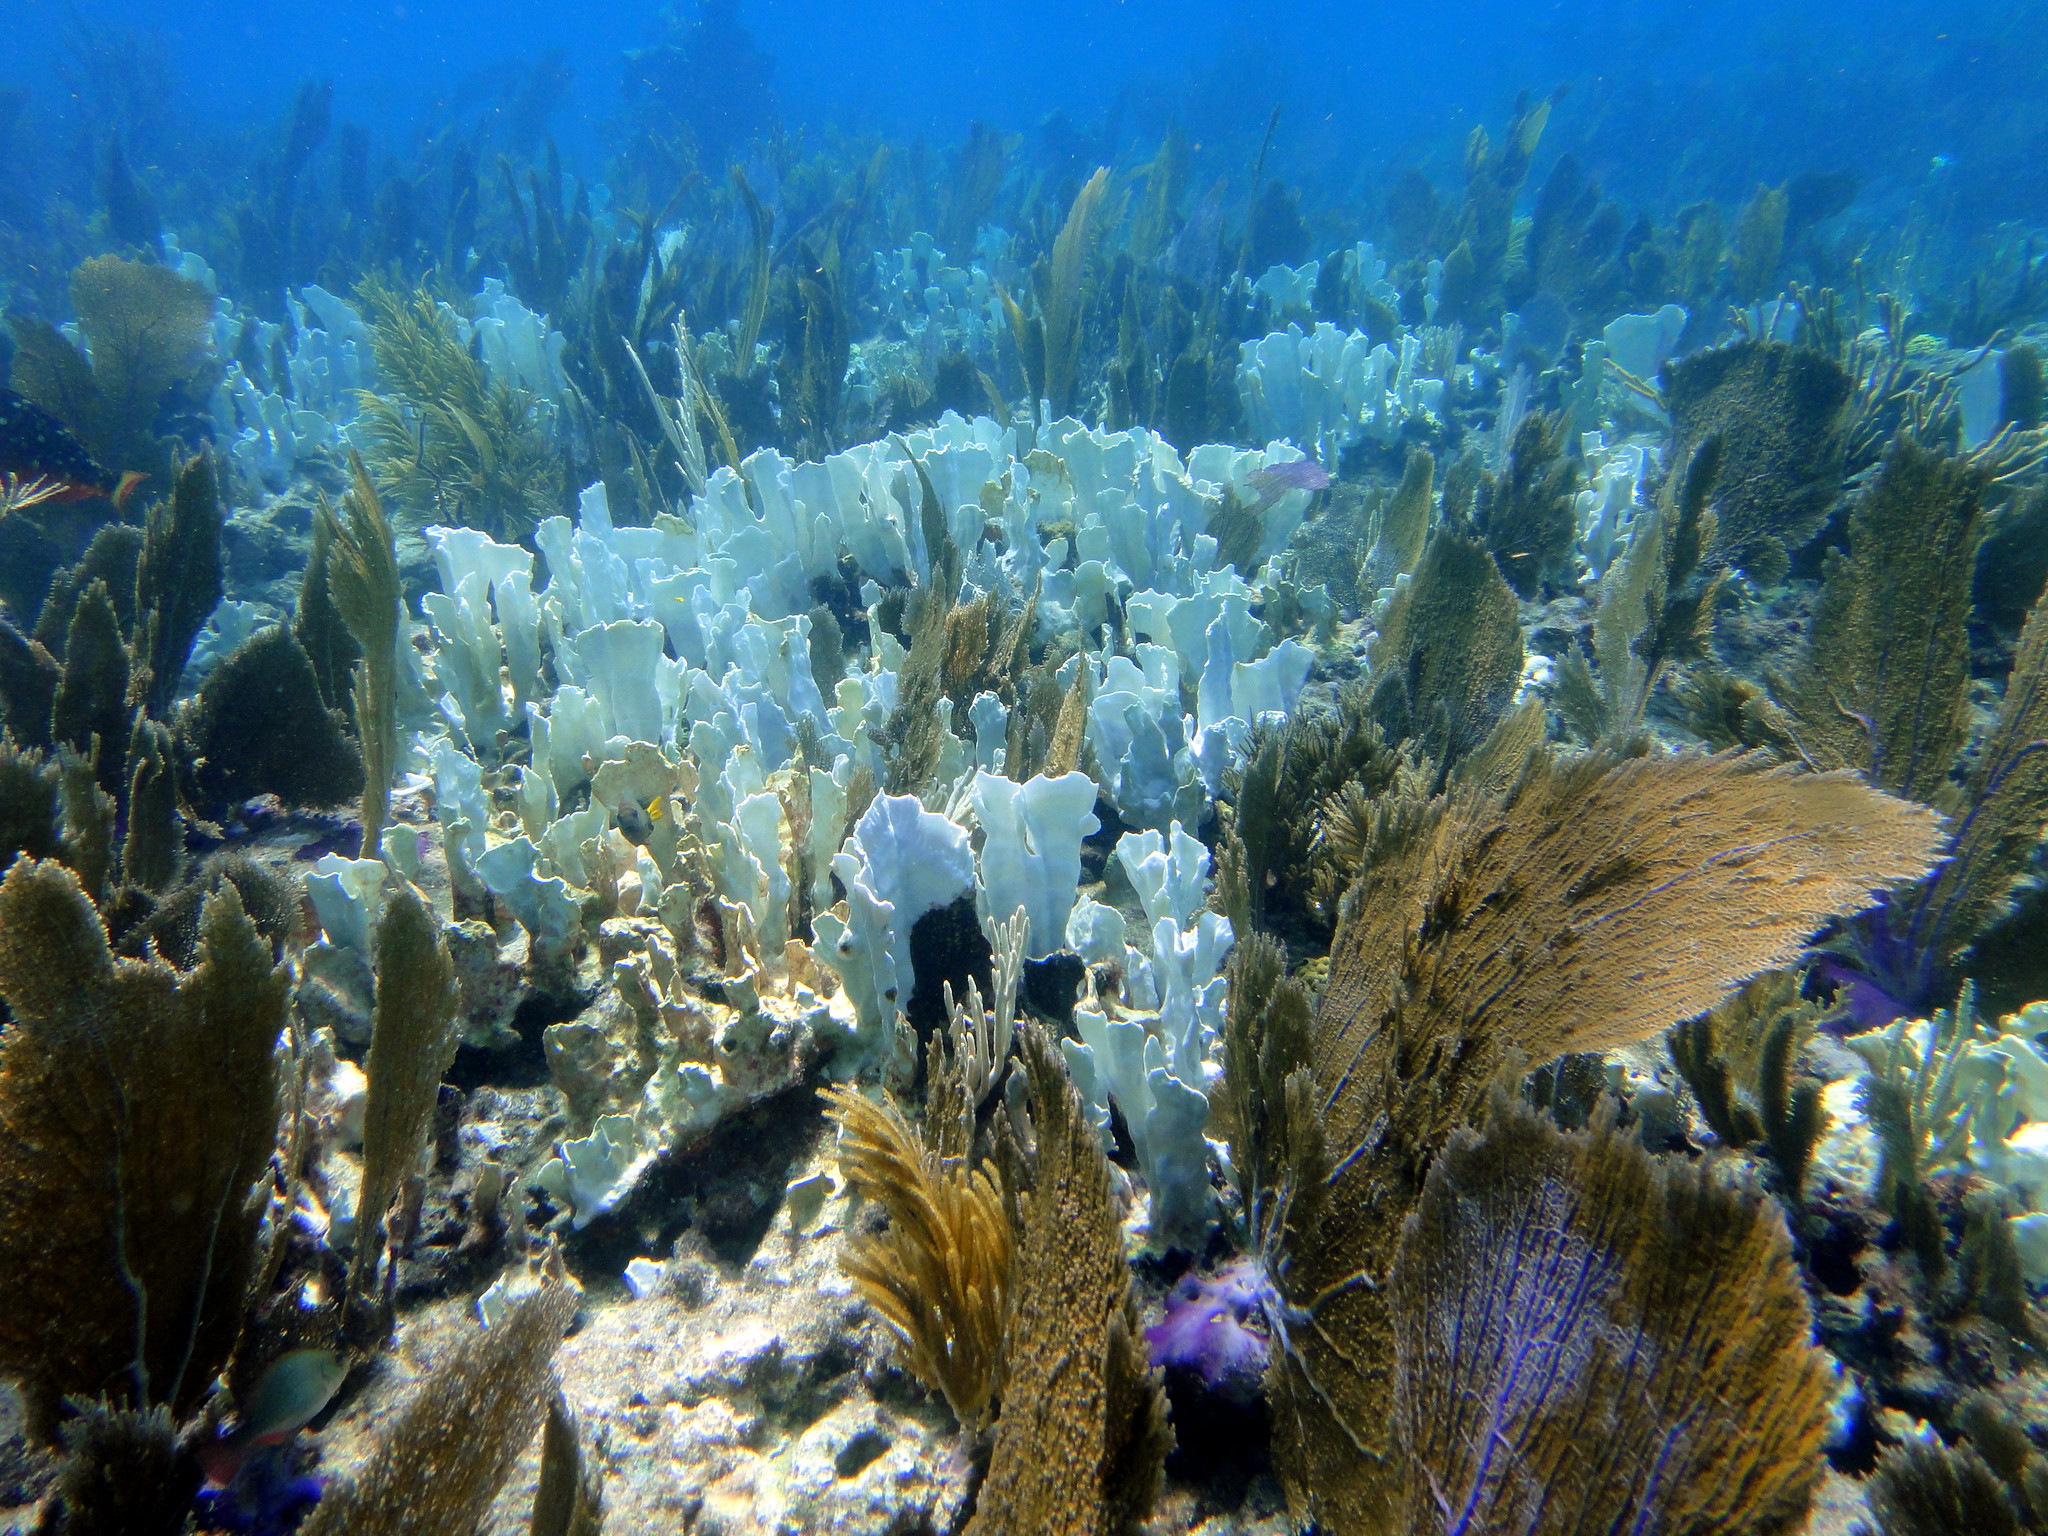 Bleached plate corals and Sea Fans on Molasses Reef, Key Largo, Florida (by Matt Kieffer CC BY-SA 2.0 DEED via Flickr).